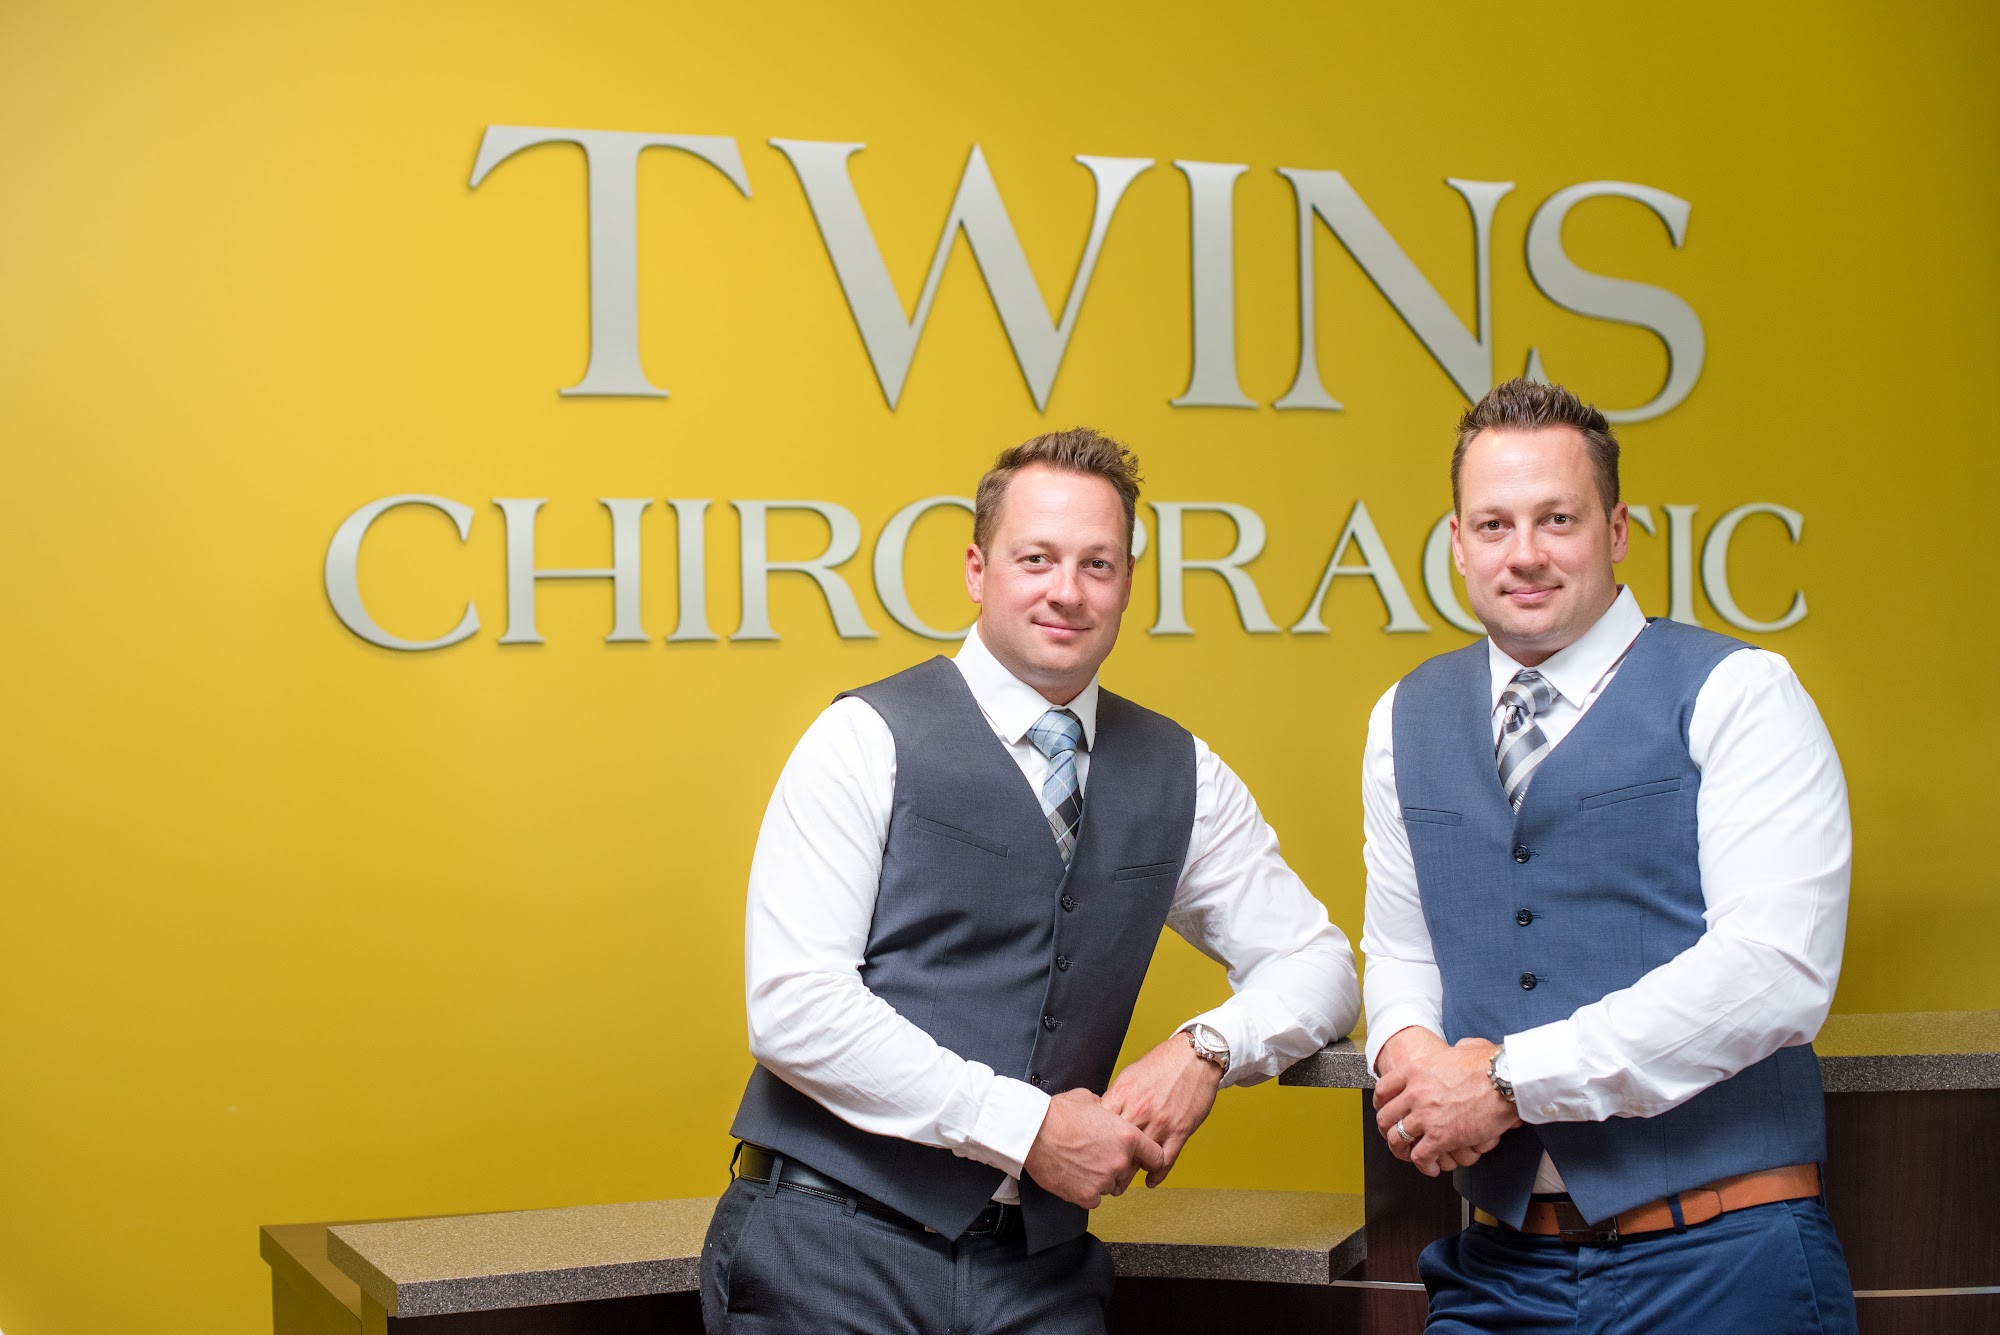 Twins Chiropractic and Physical Medicine